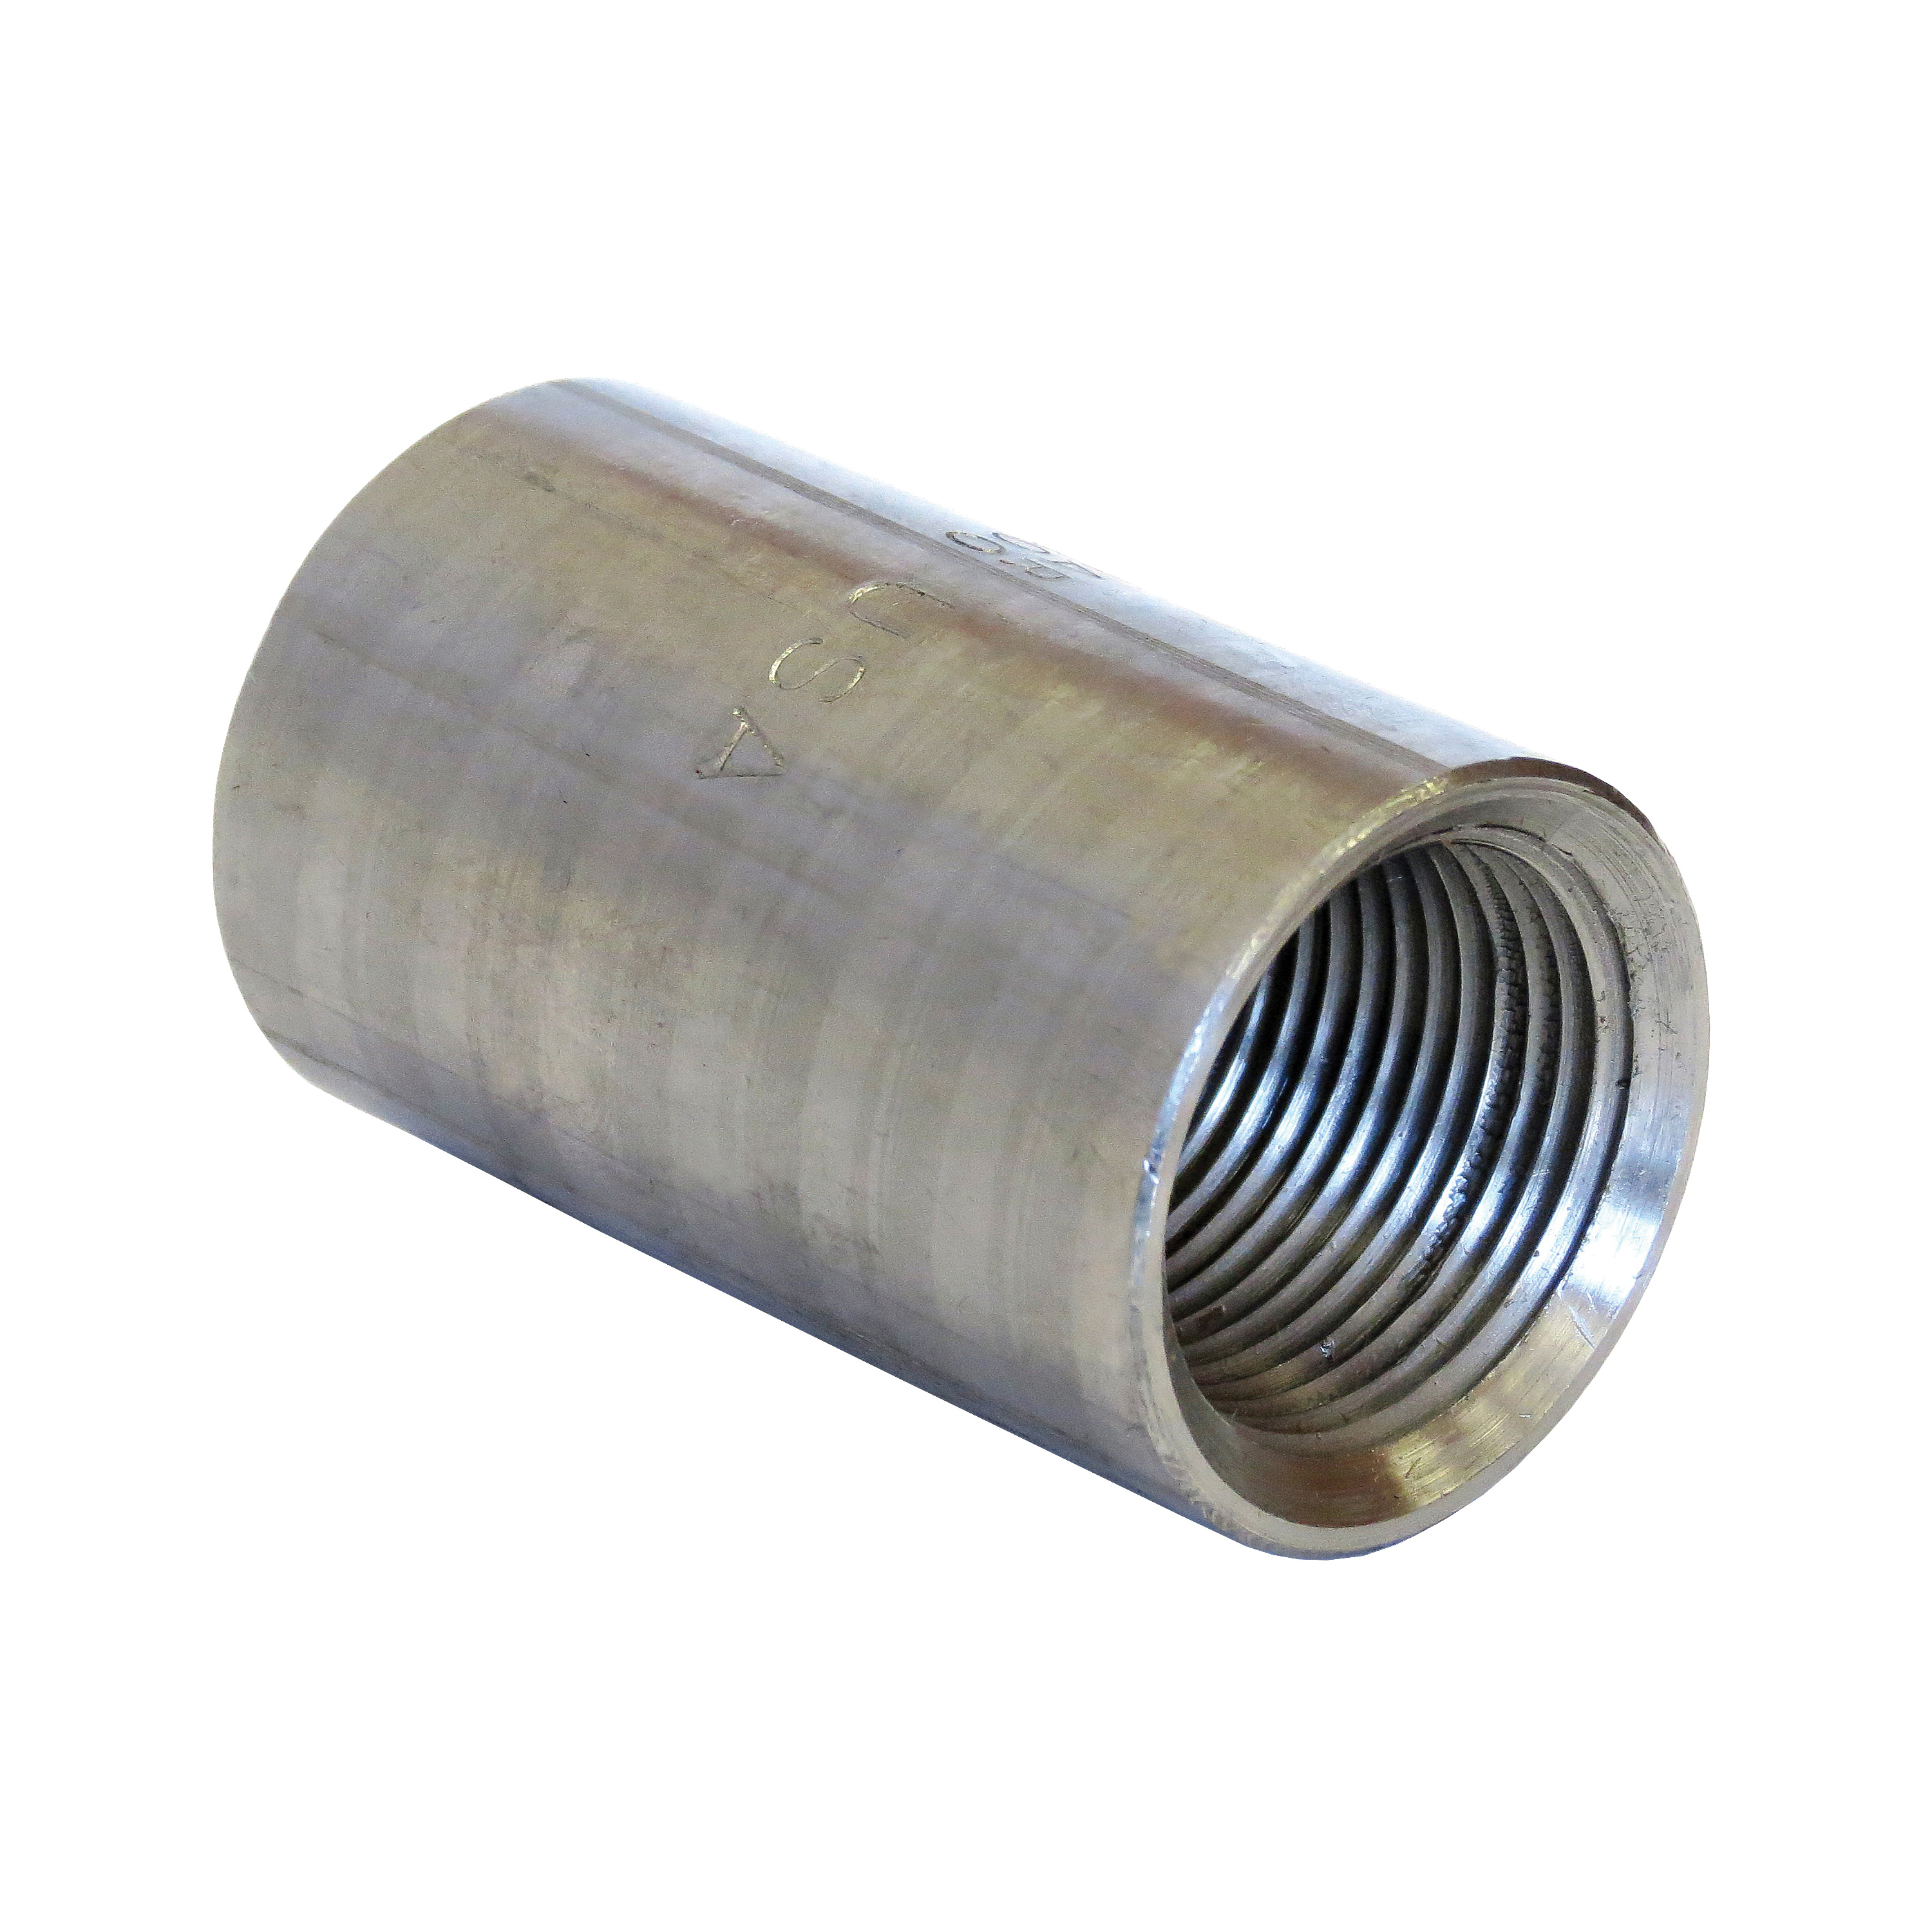 0321200487 Taper Tapped Pipe Coupling, 1/2 in, SCH 80/XH, Galvanized, Domestic